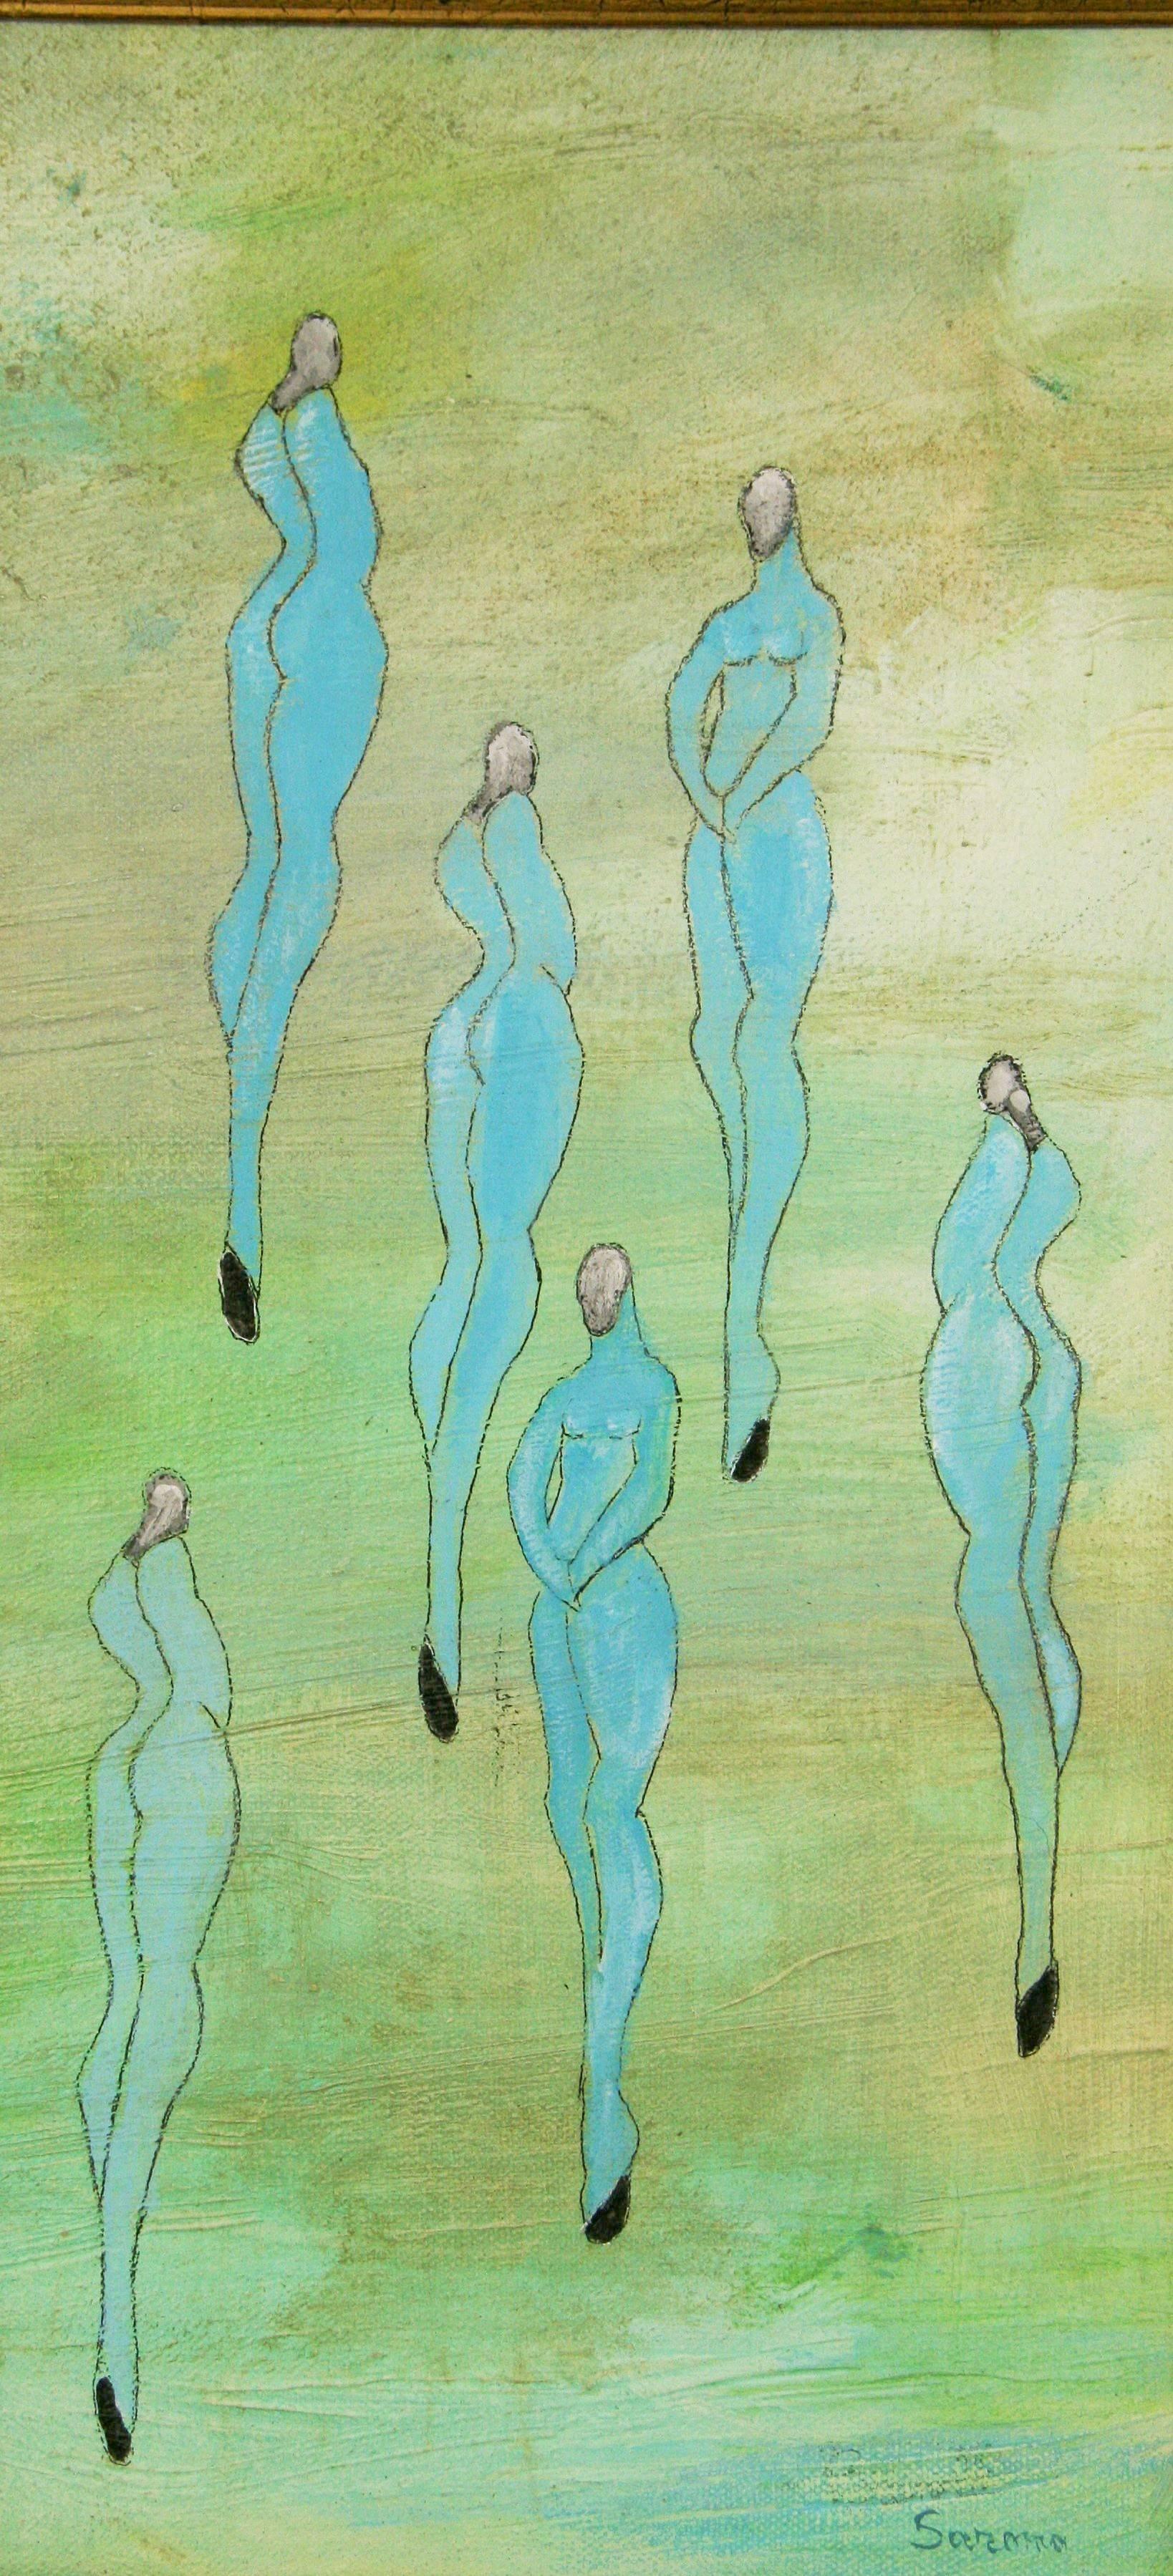 5-2738 Abstract Figural acrylic painting
Acrylic on artist board
Image size 15.5x7.5